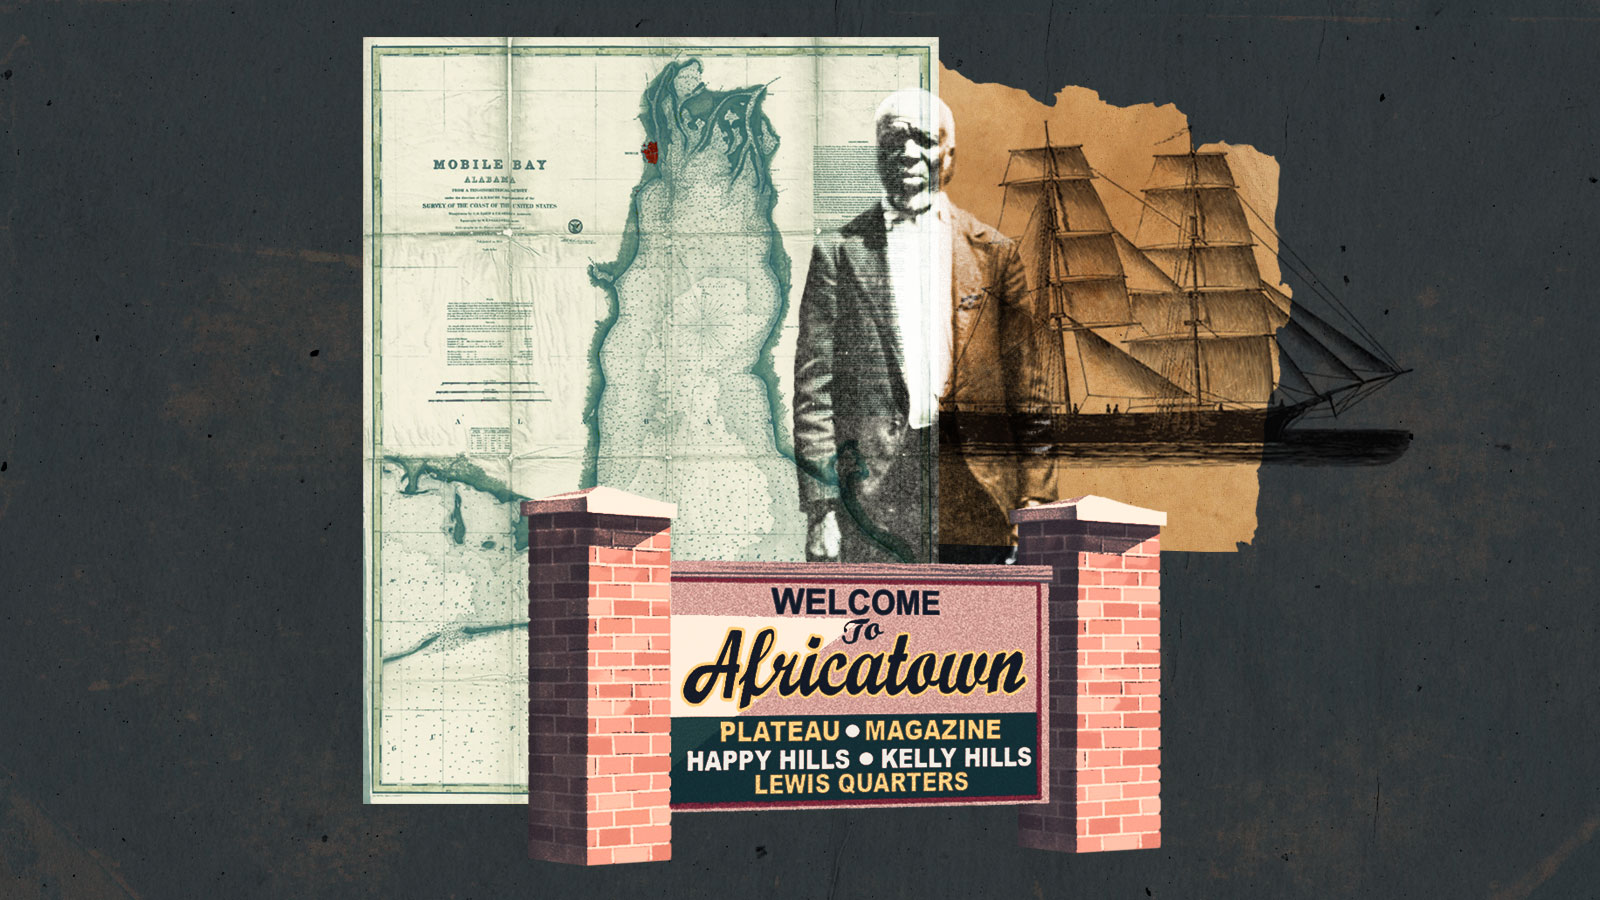 Digital collage: historic map of Mobile Bay, sign to Africatown, photo of Cudjo Lewis, and illustration of a slave ship